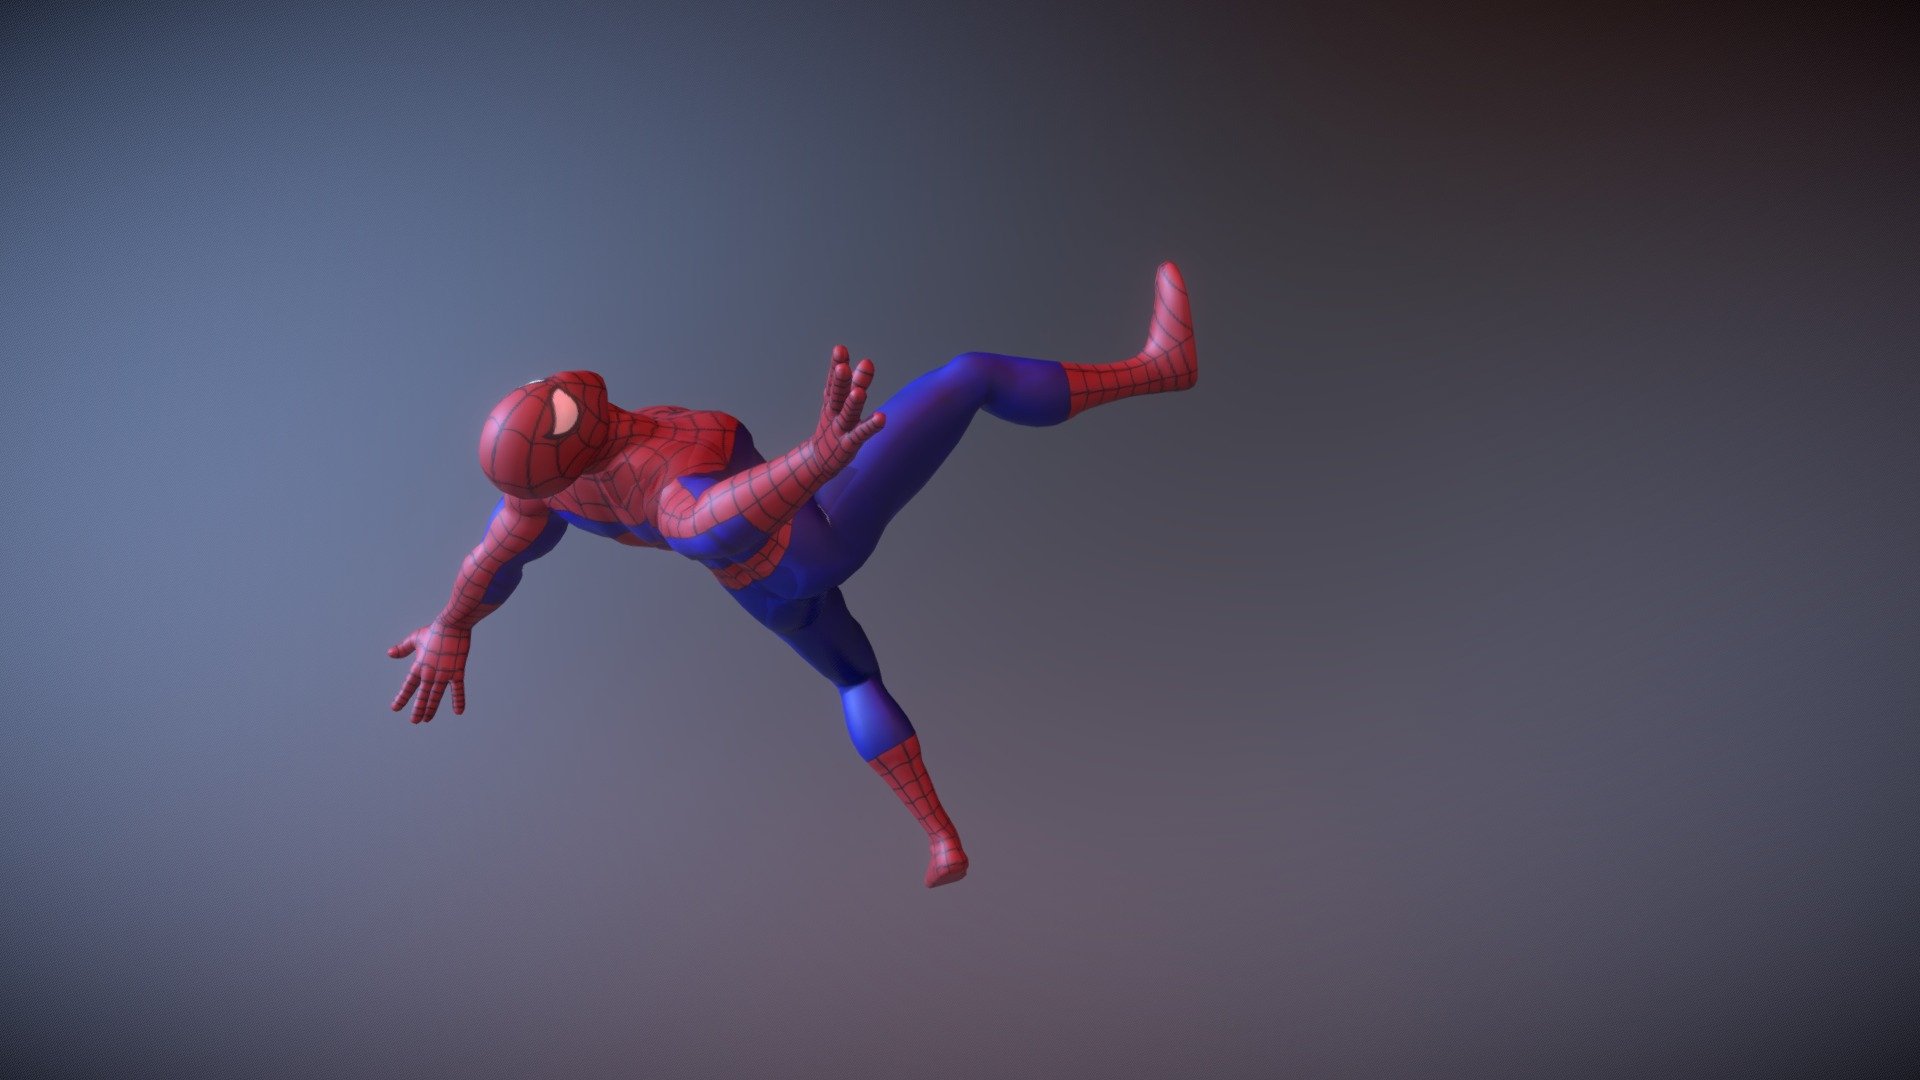 Rigged spiderman 
With animations
Ready to use in any project
Single sheet texture - SPIDERMAN - Classic /RIGGES/ Animations - 3D model by BOSSposes (@bossposes3d) 3d model